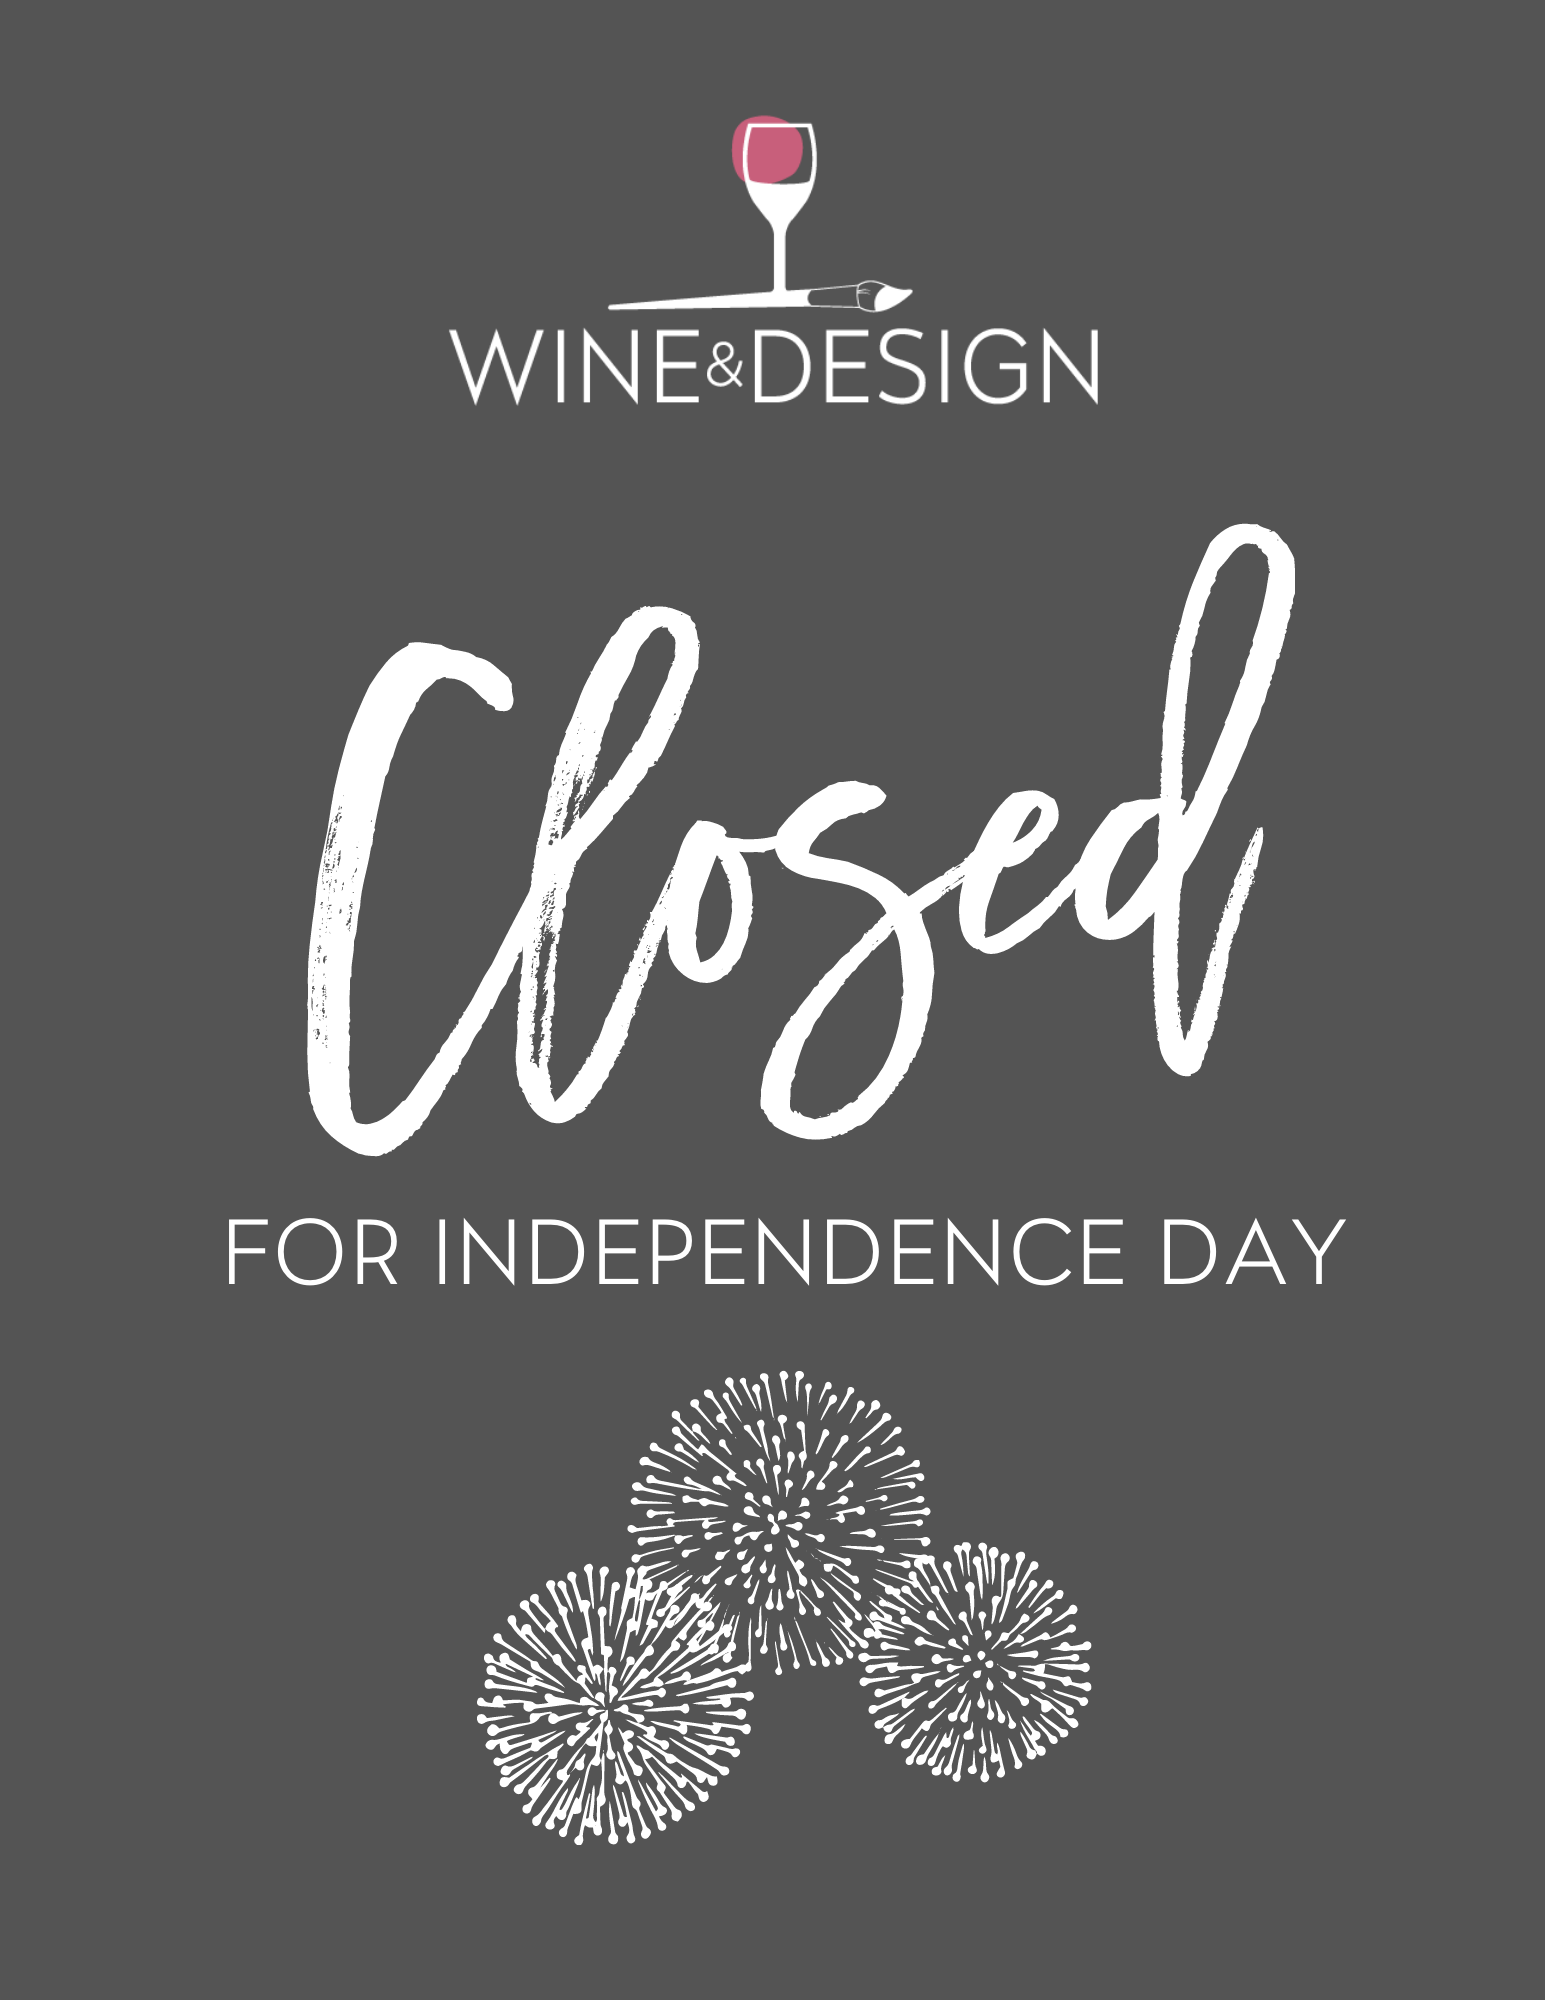 Studio Closed for Independence Day!